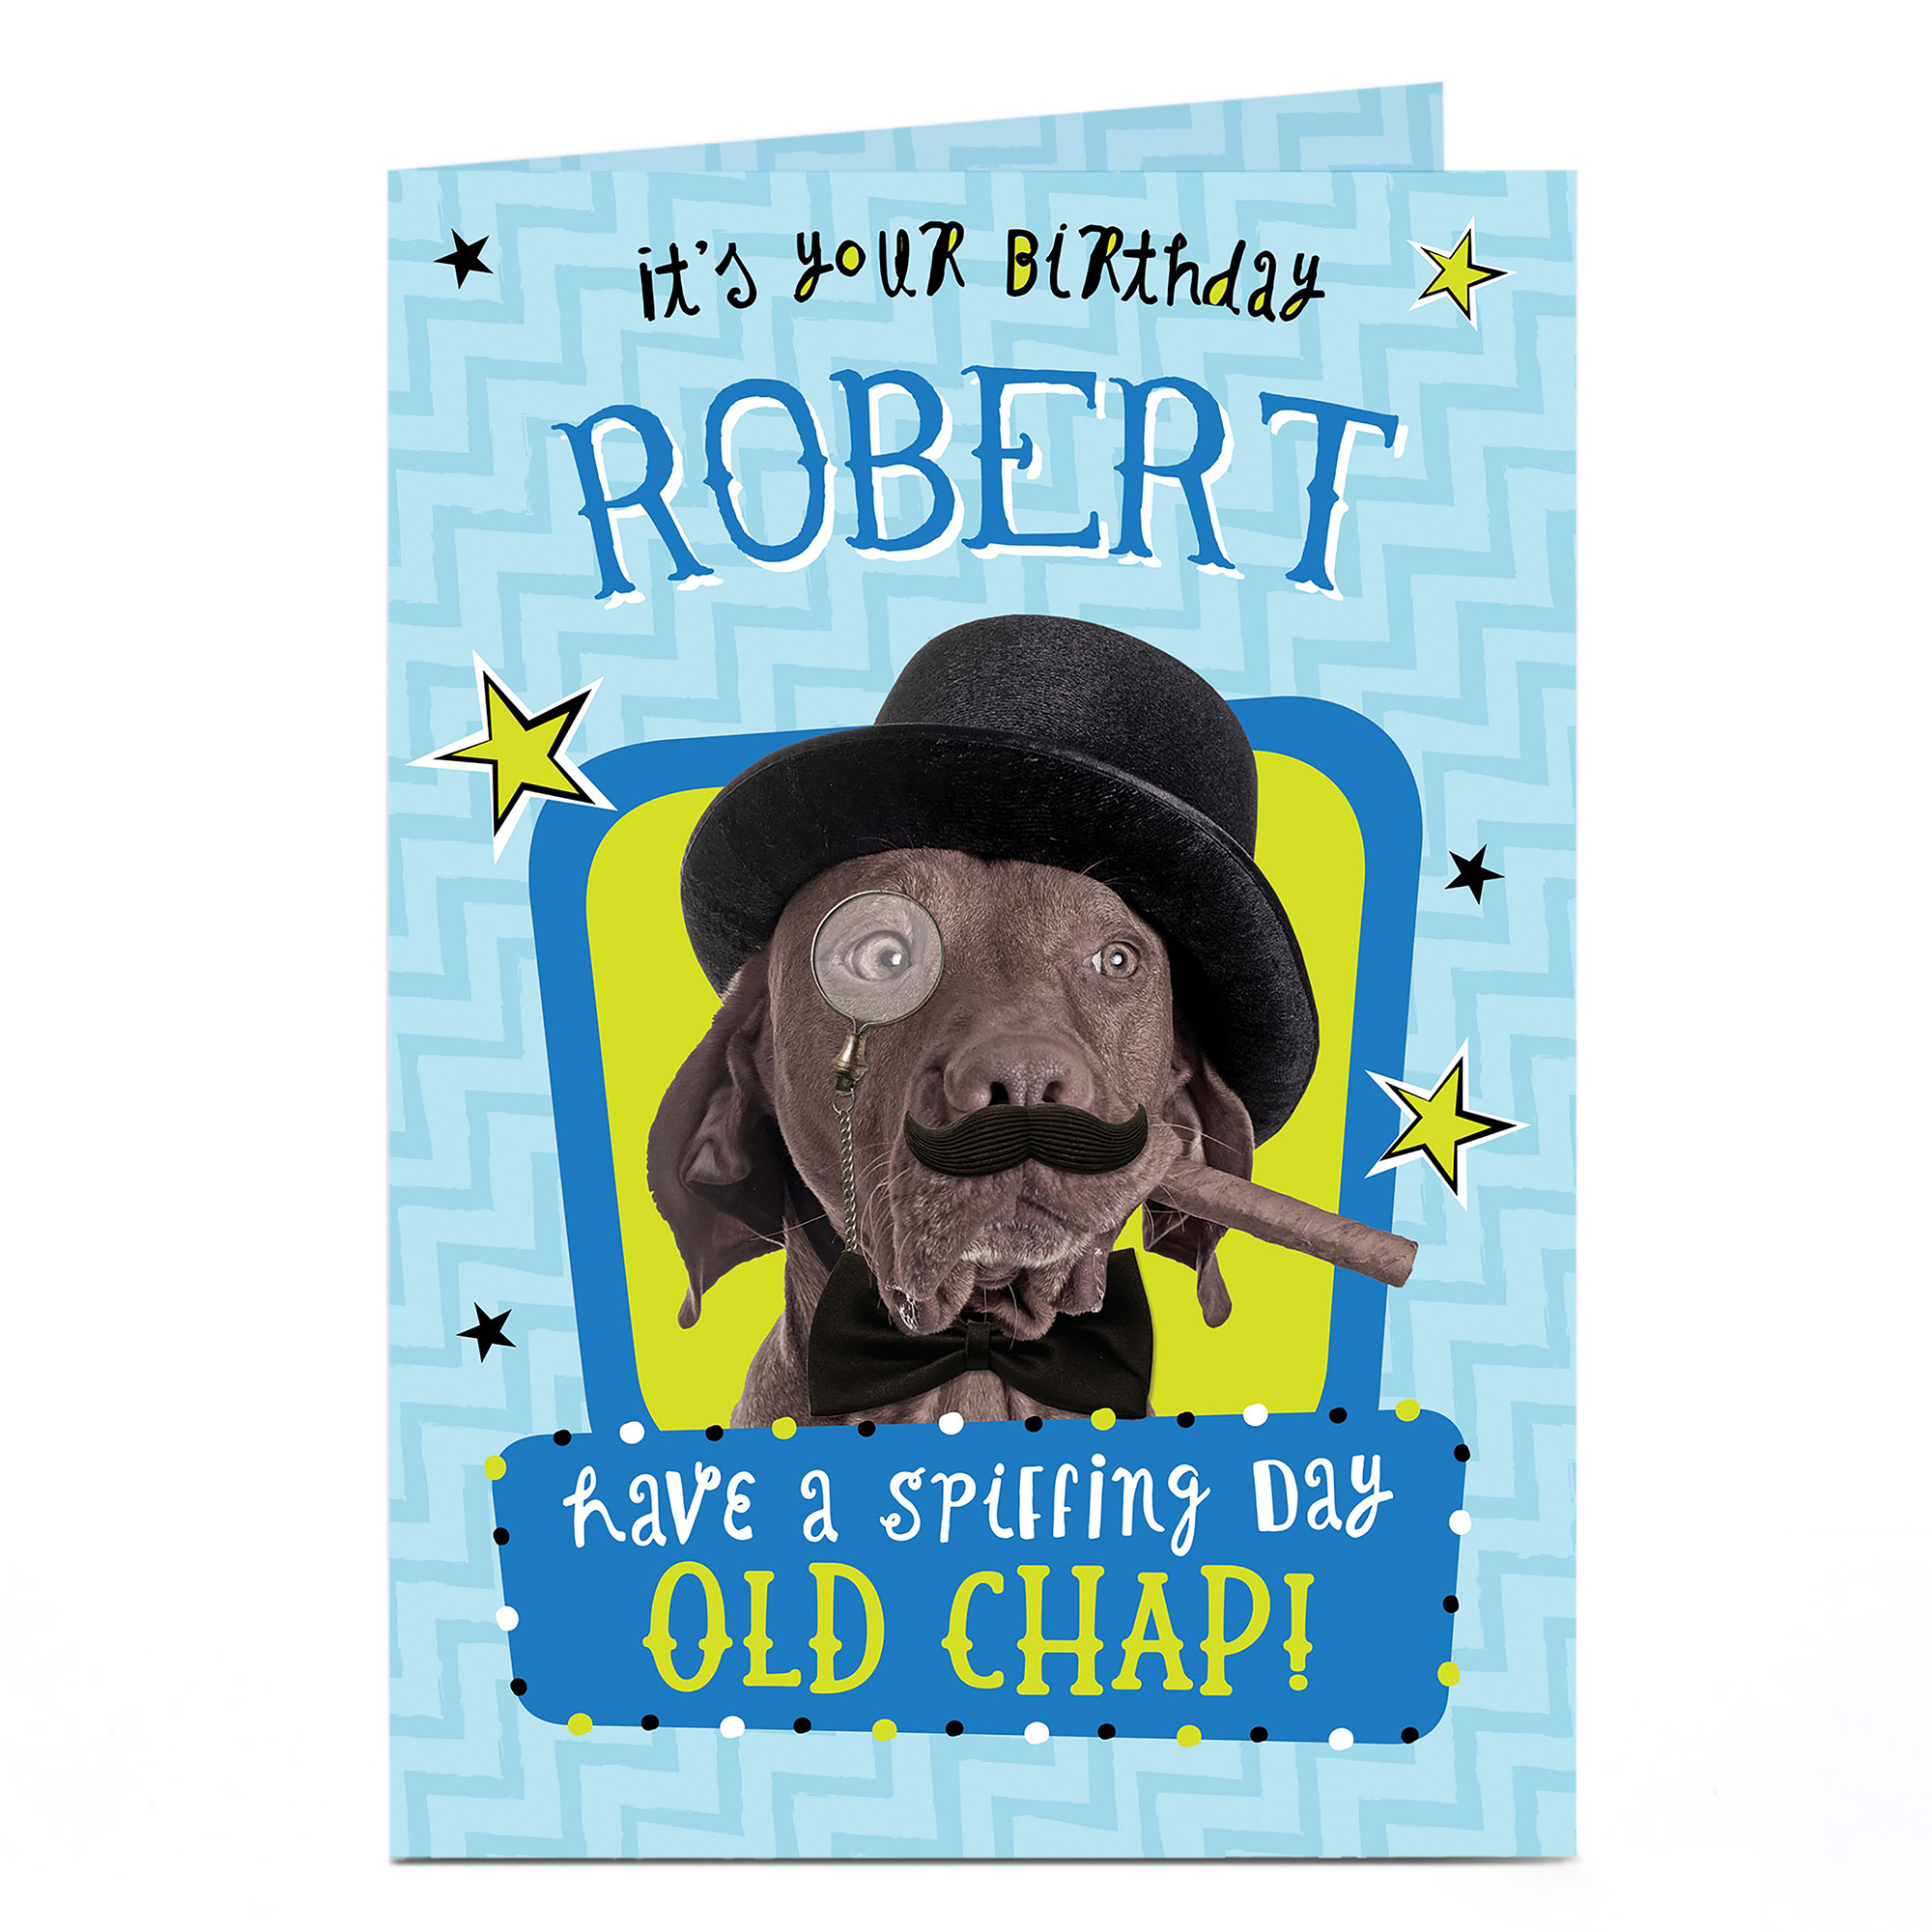 Personalised Birthday Card - Spiffing Day Old Chap